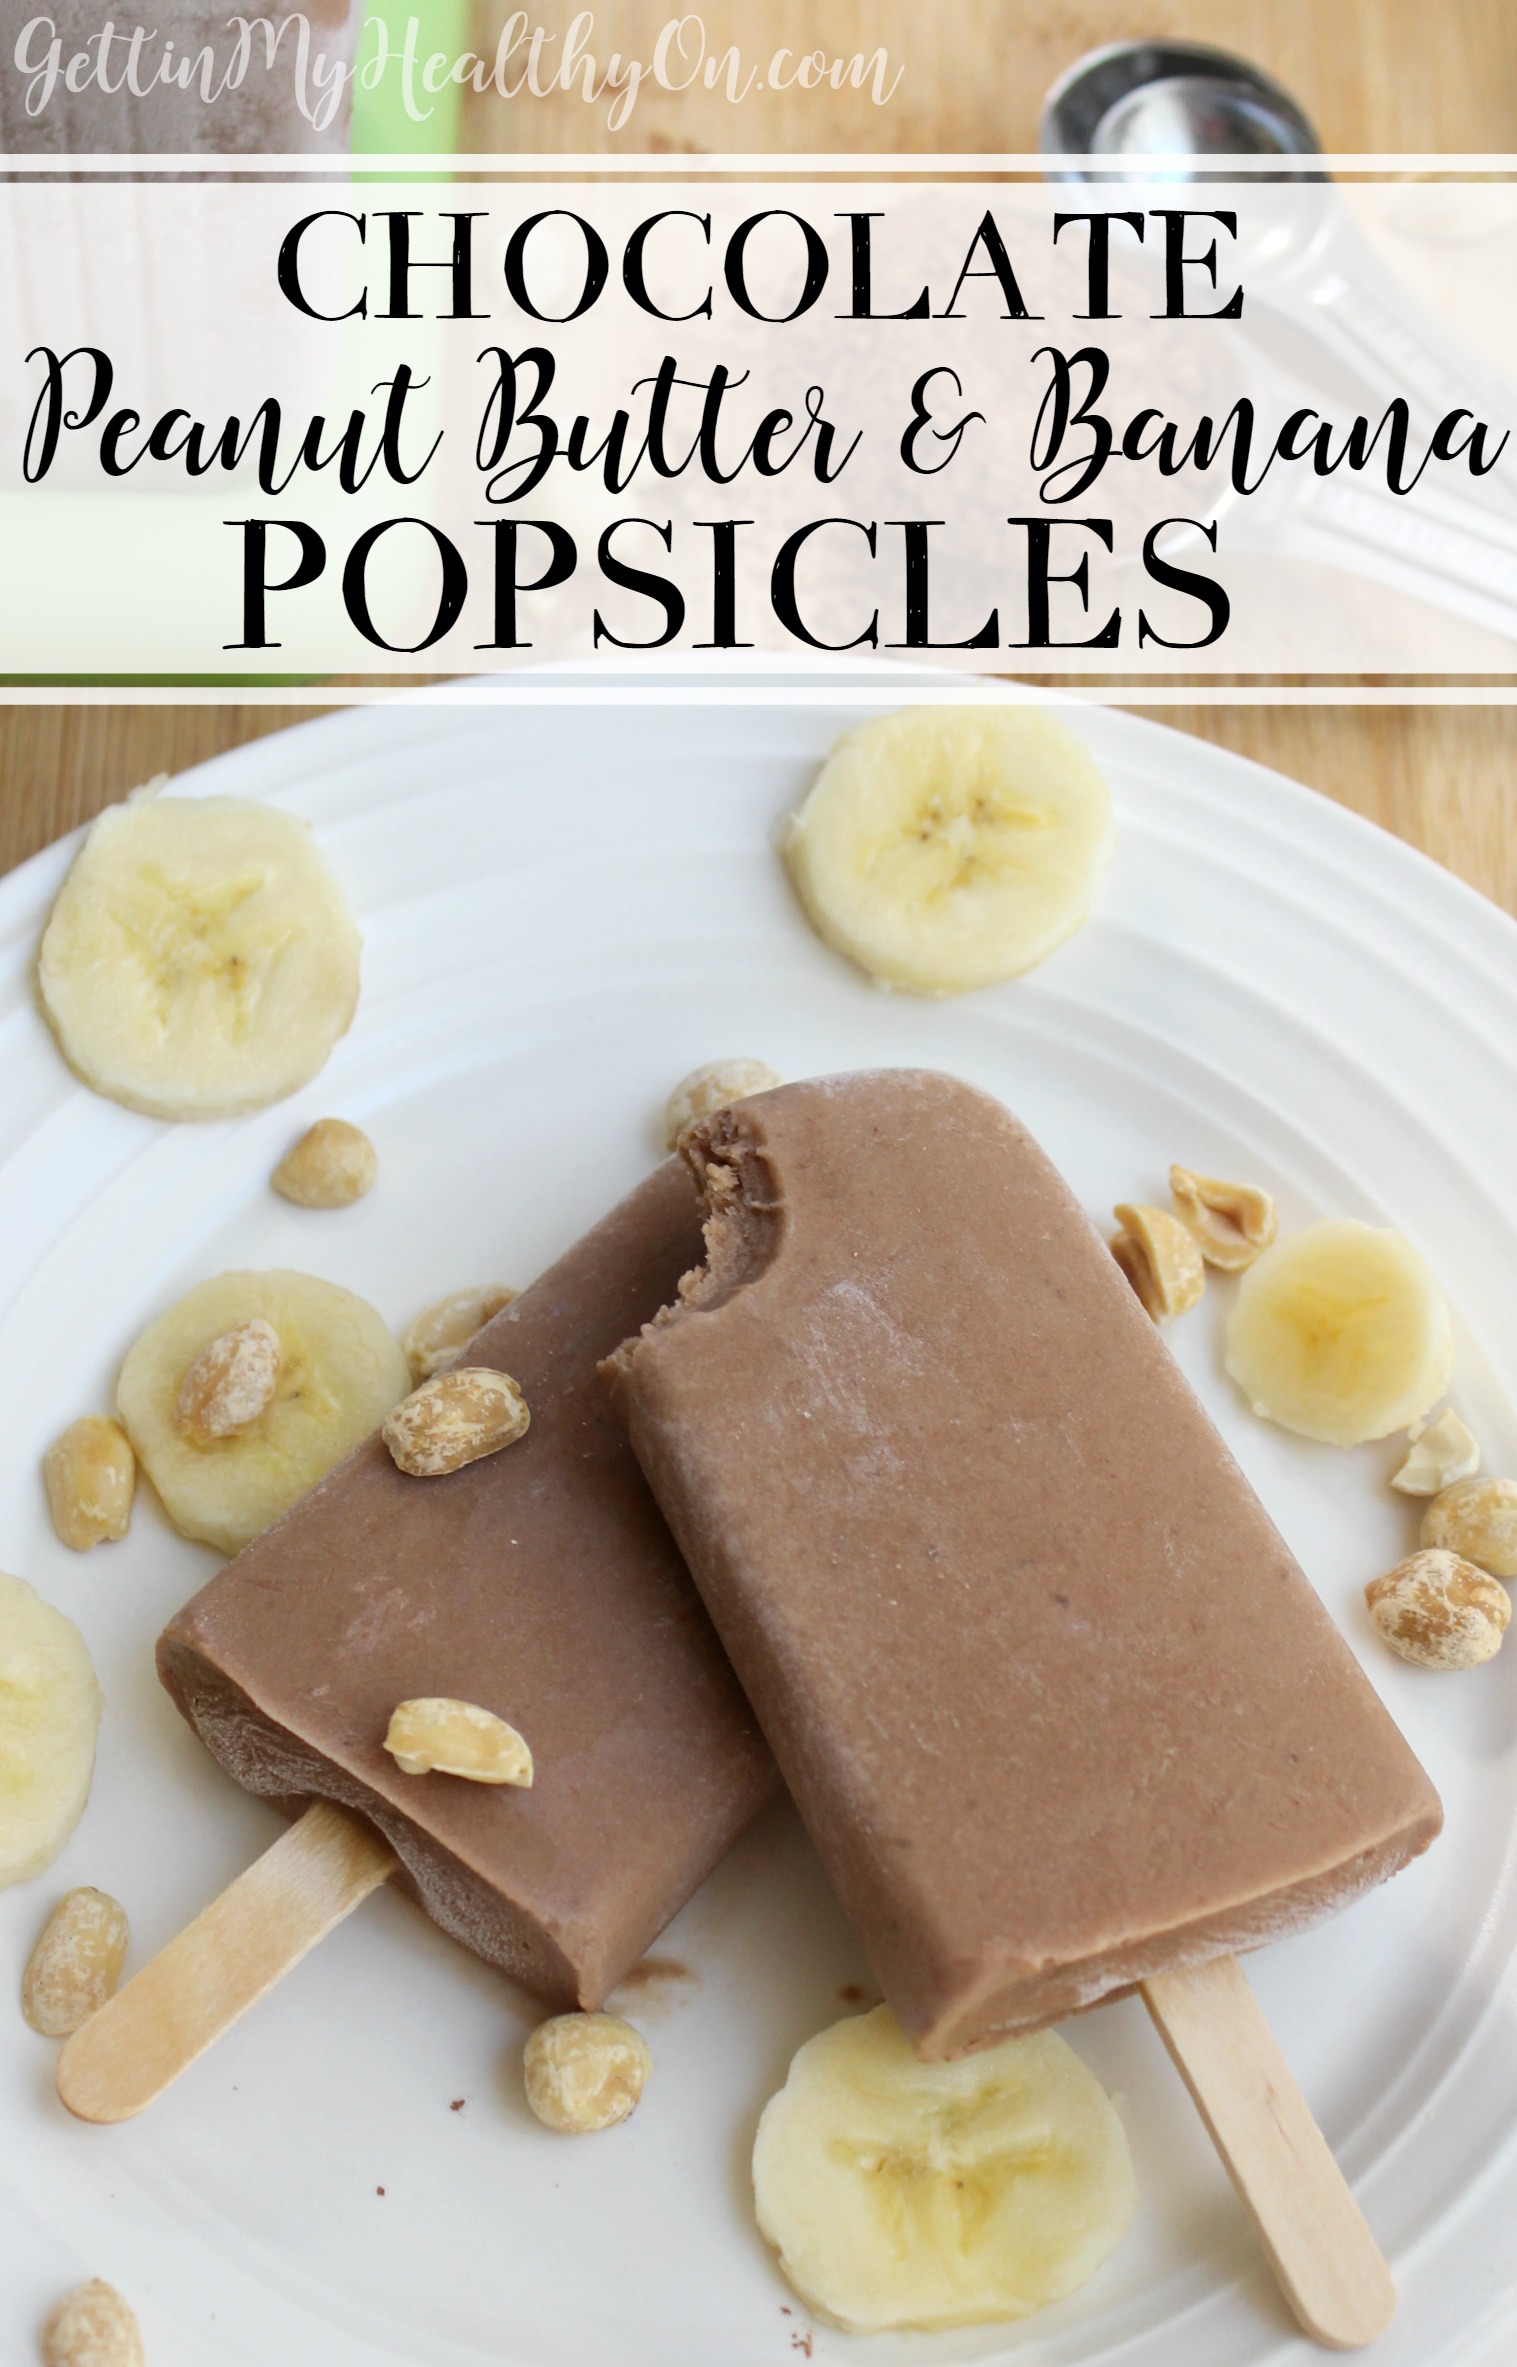 Chocolate, Peanut Butter, and Banana Popsicles